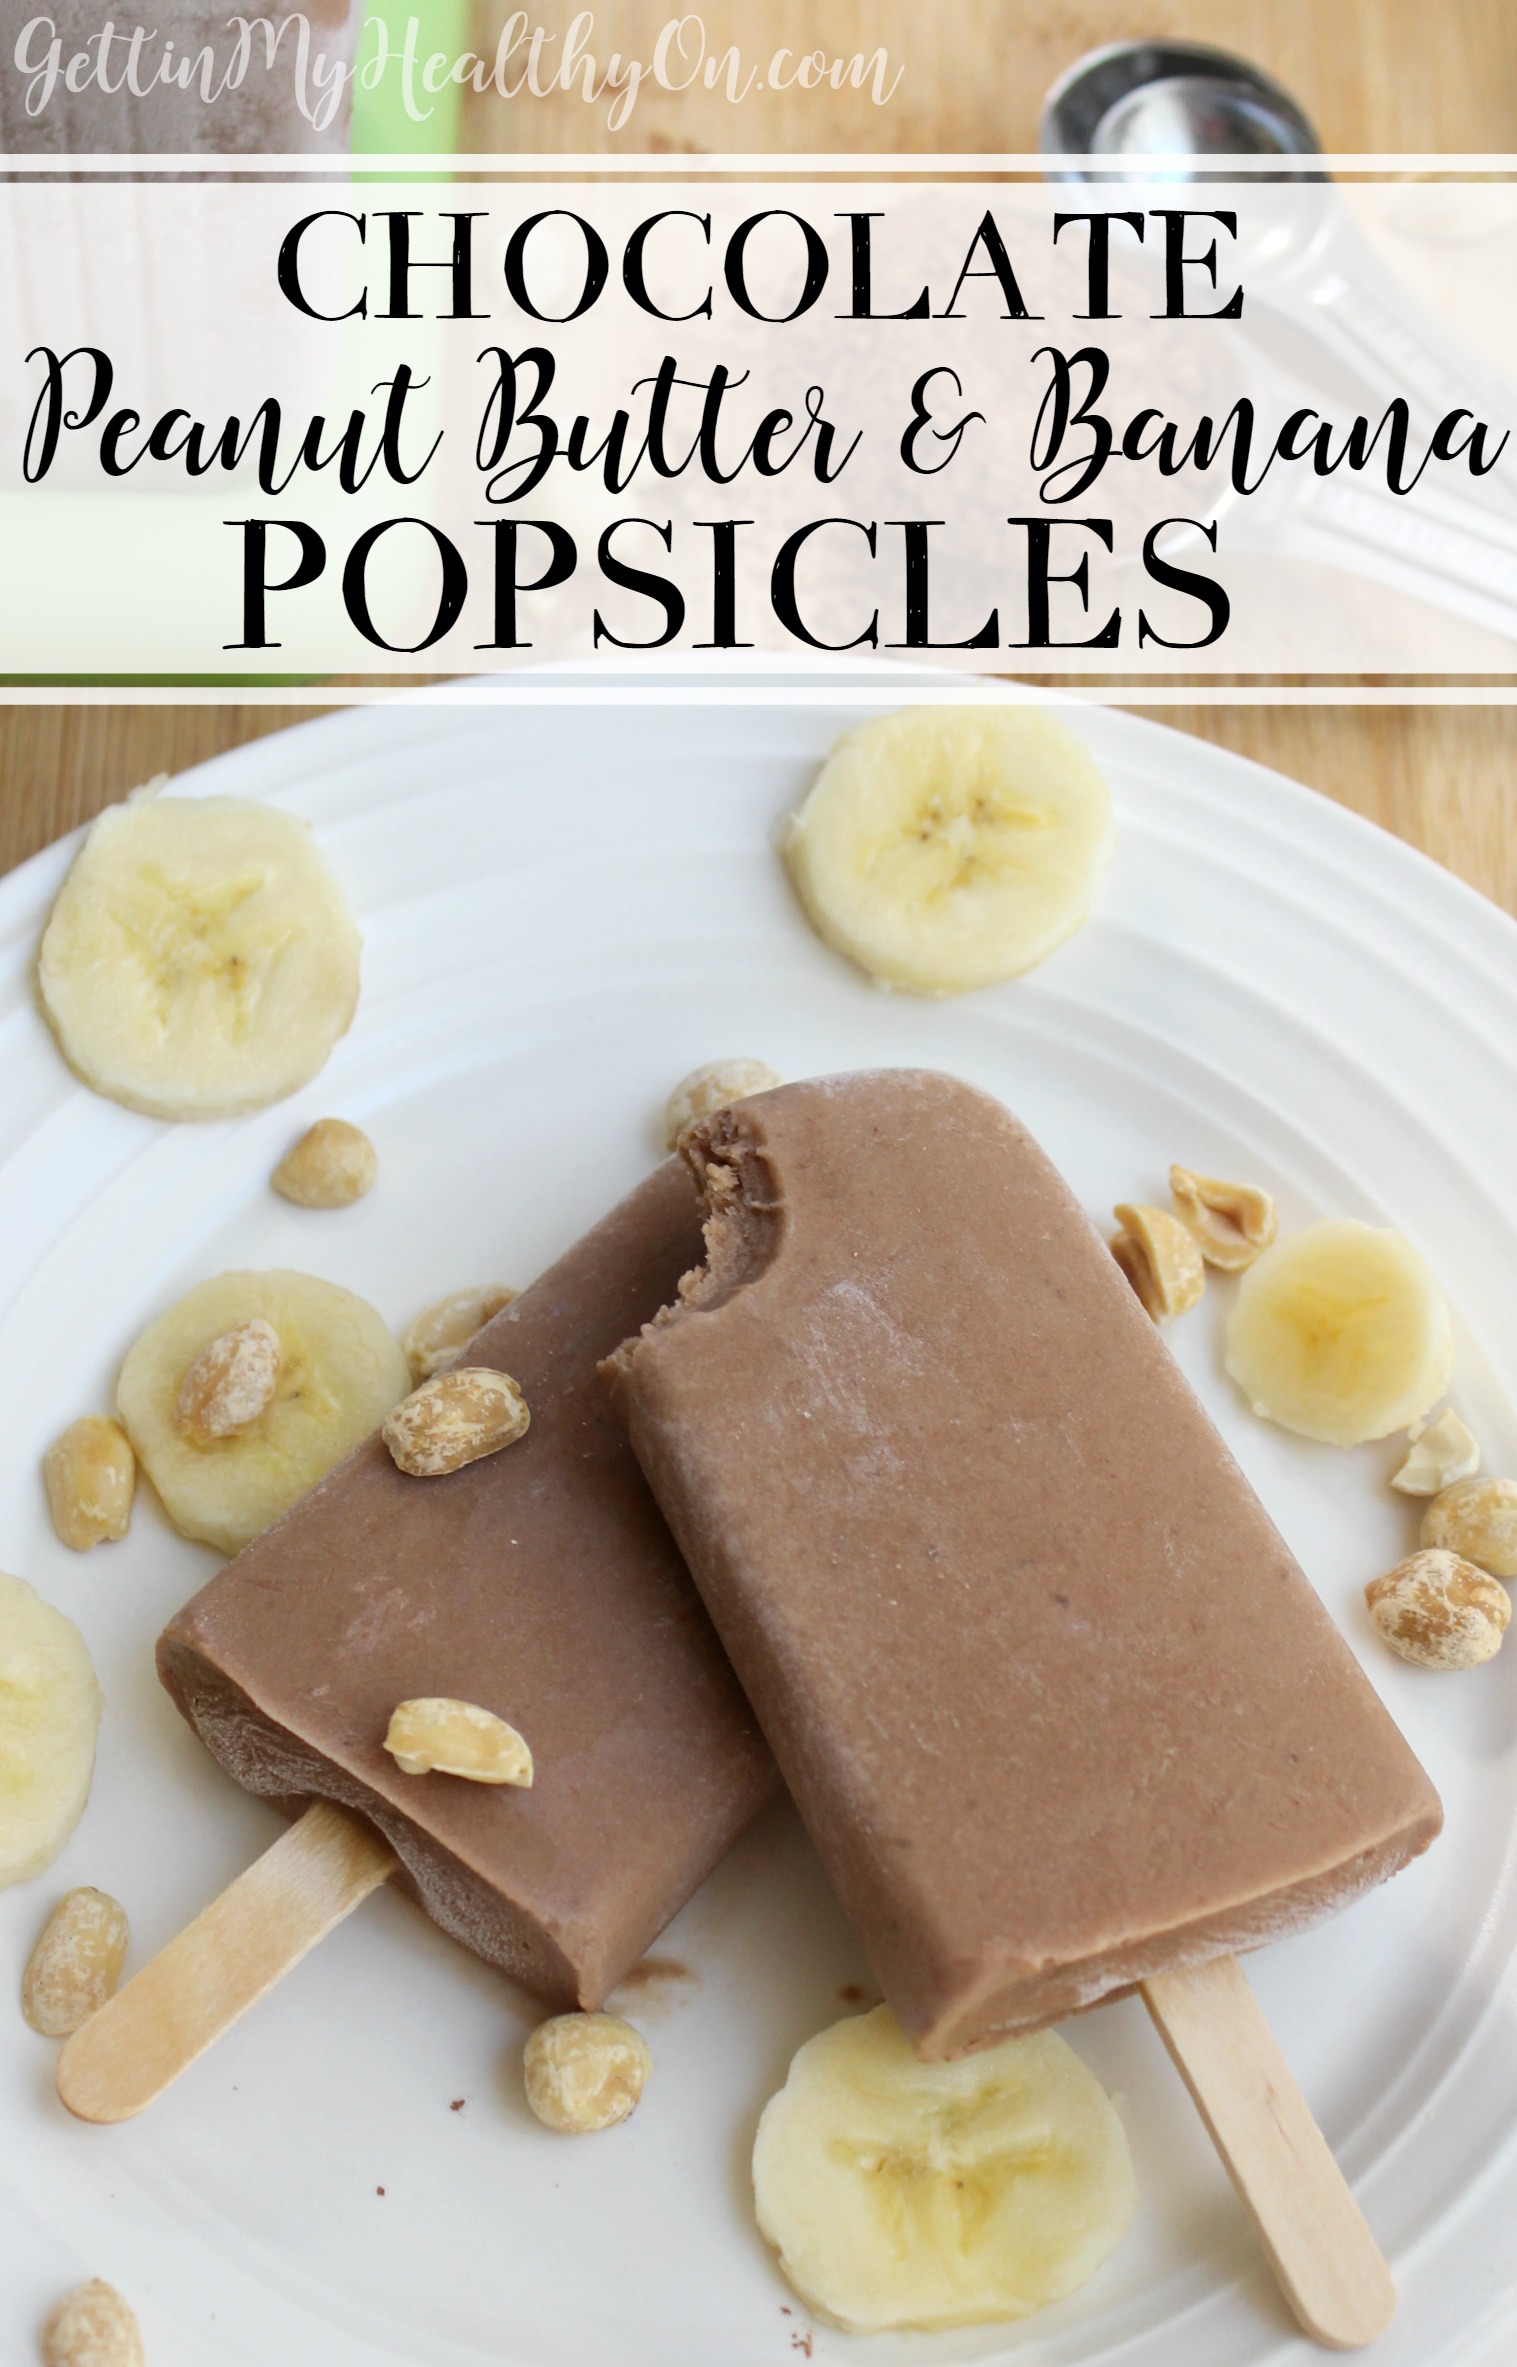 Chocolate, Peanut Butter, and Banana Popsicles